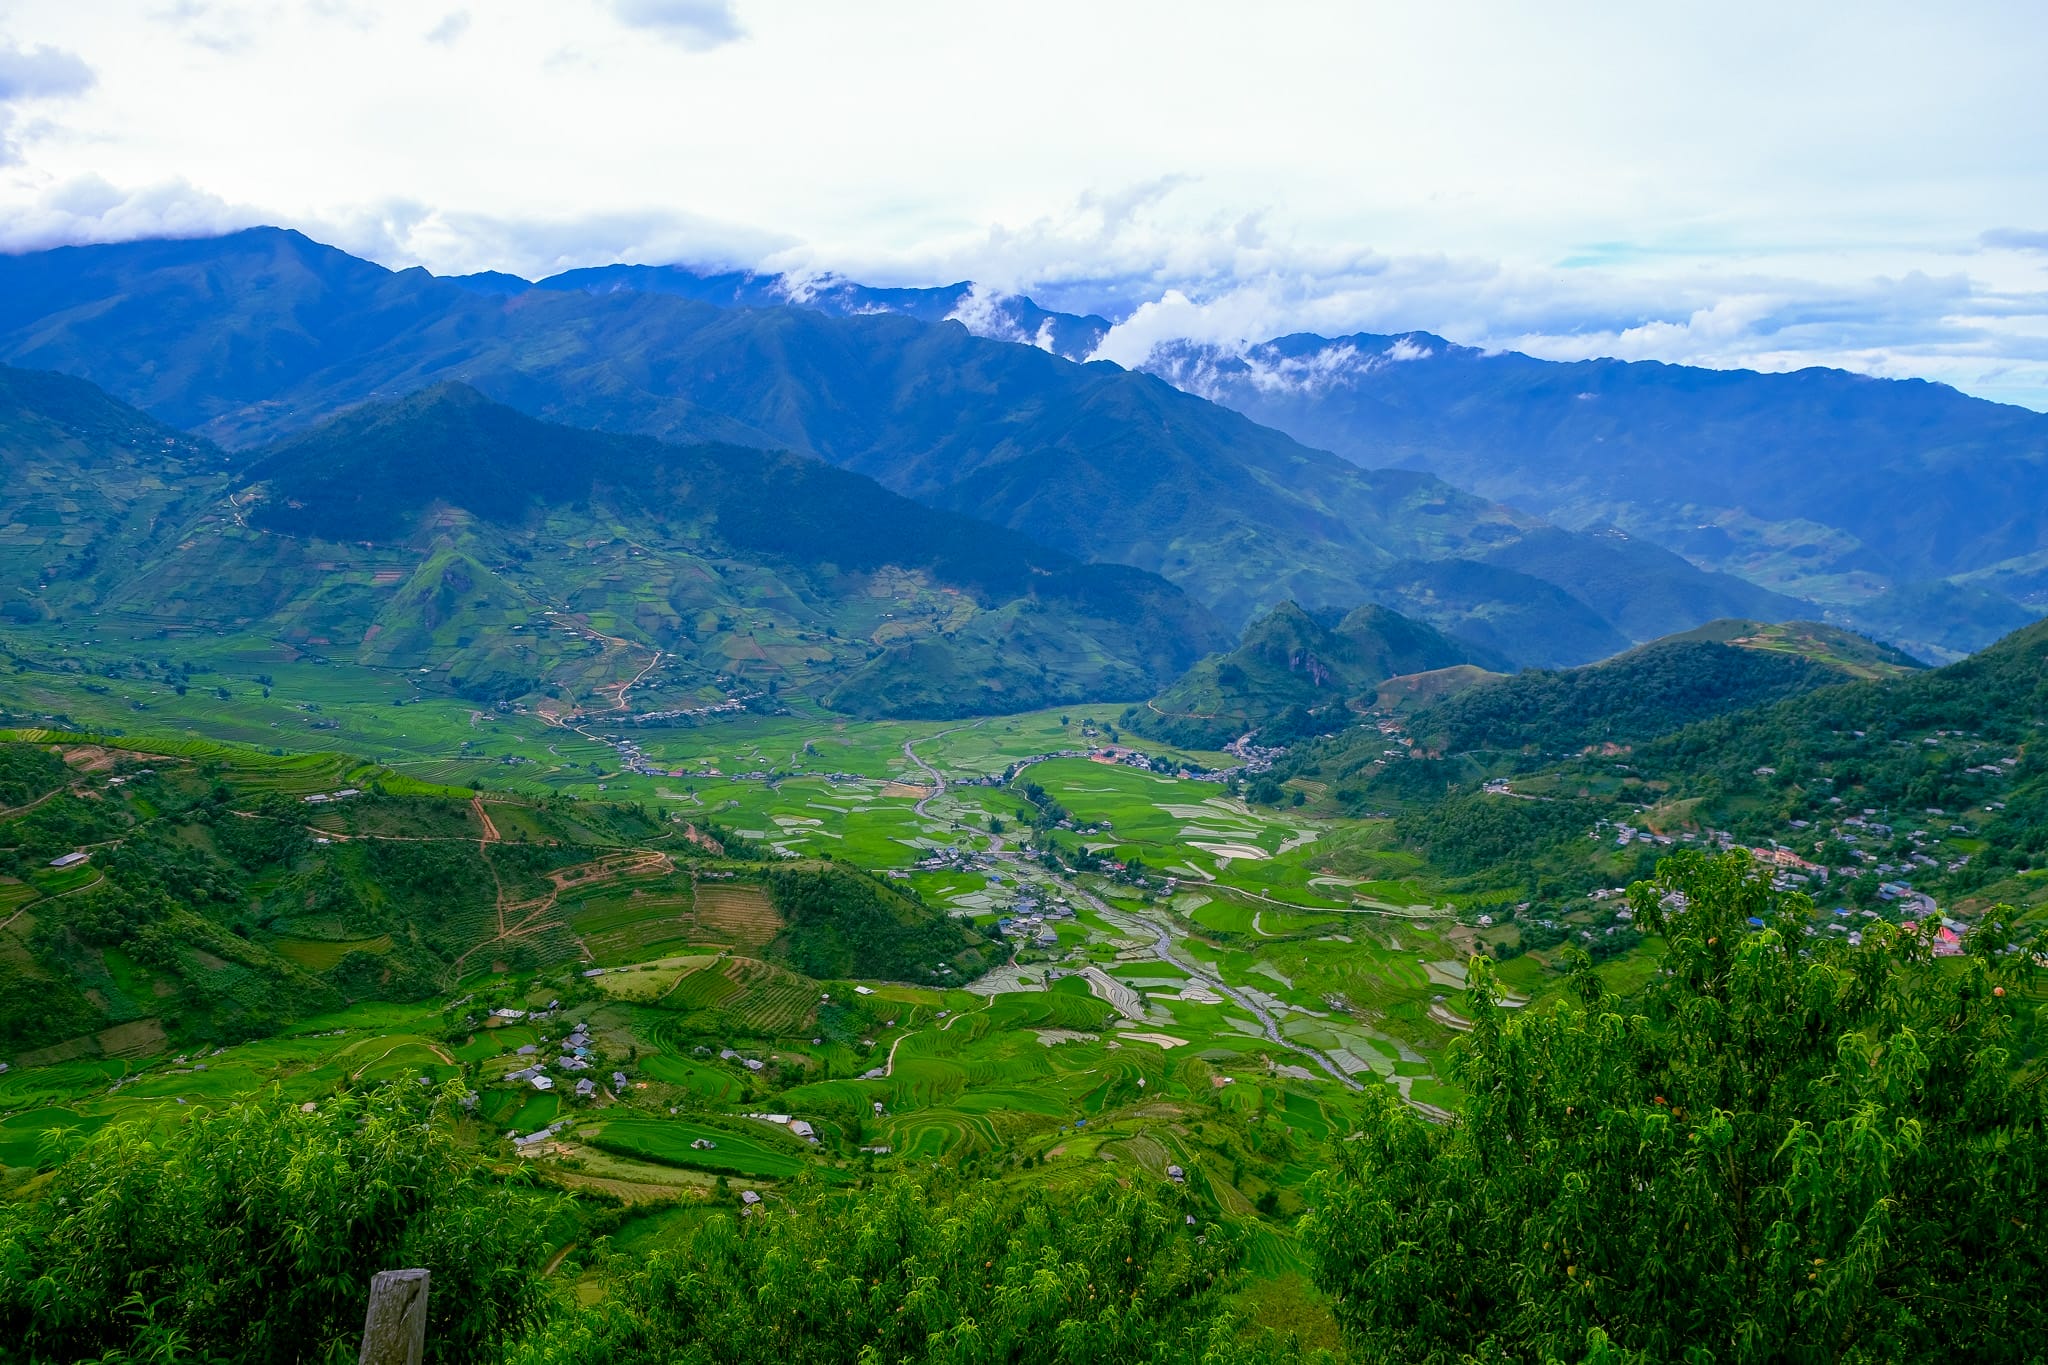 Khau Pha Pass - Why Should People Do Motorcycle Tours in Vietnam?